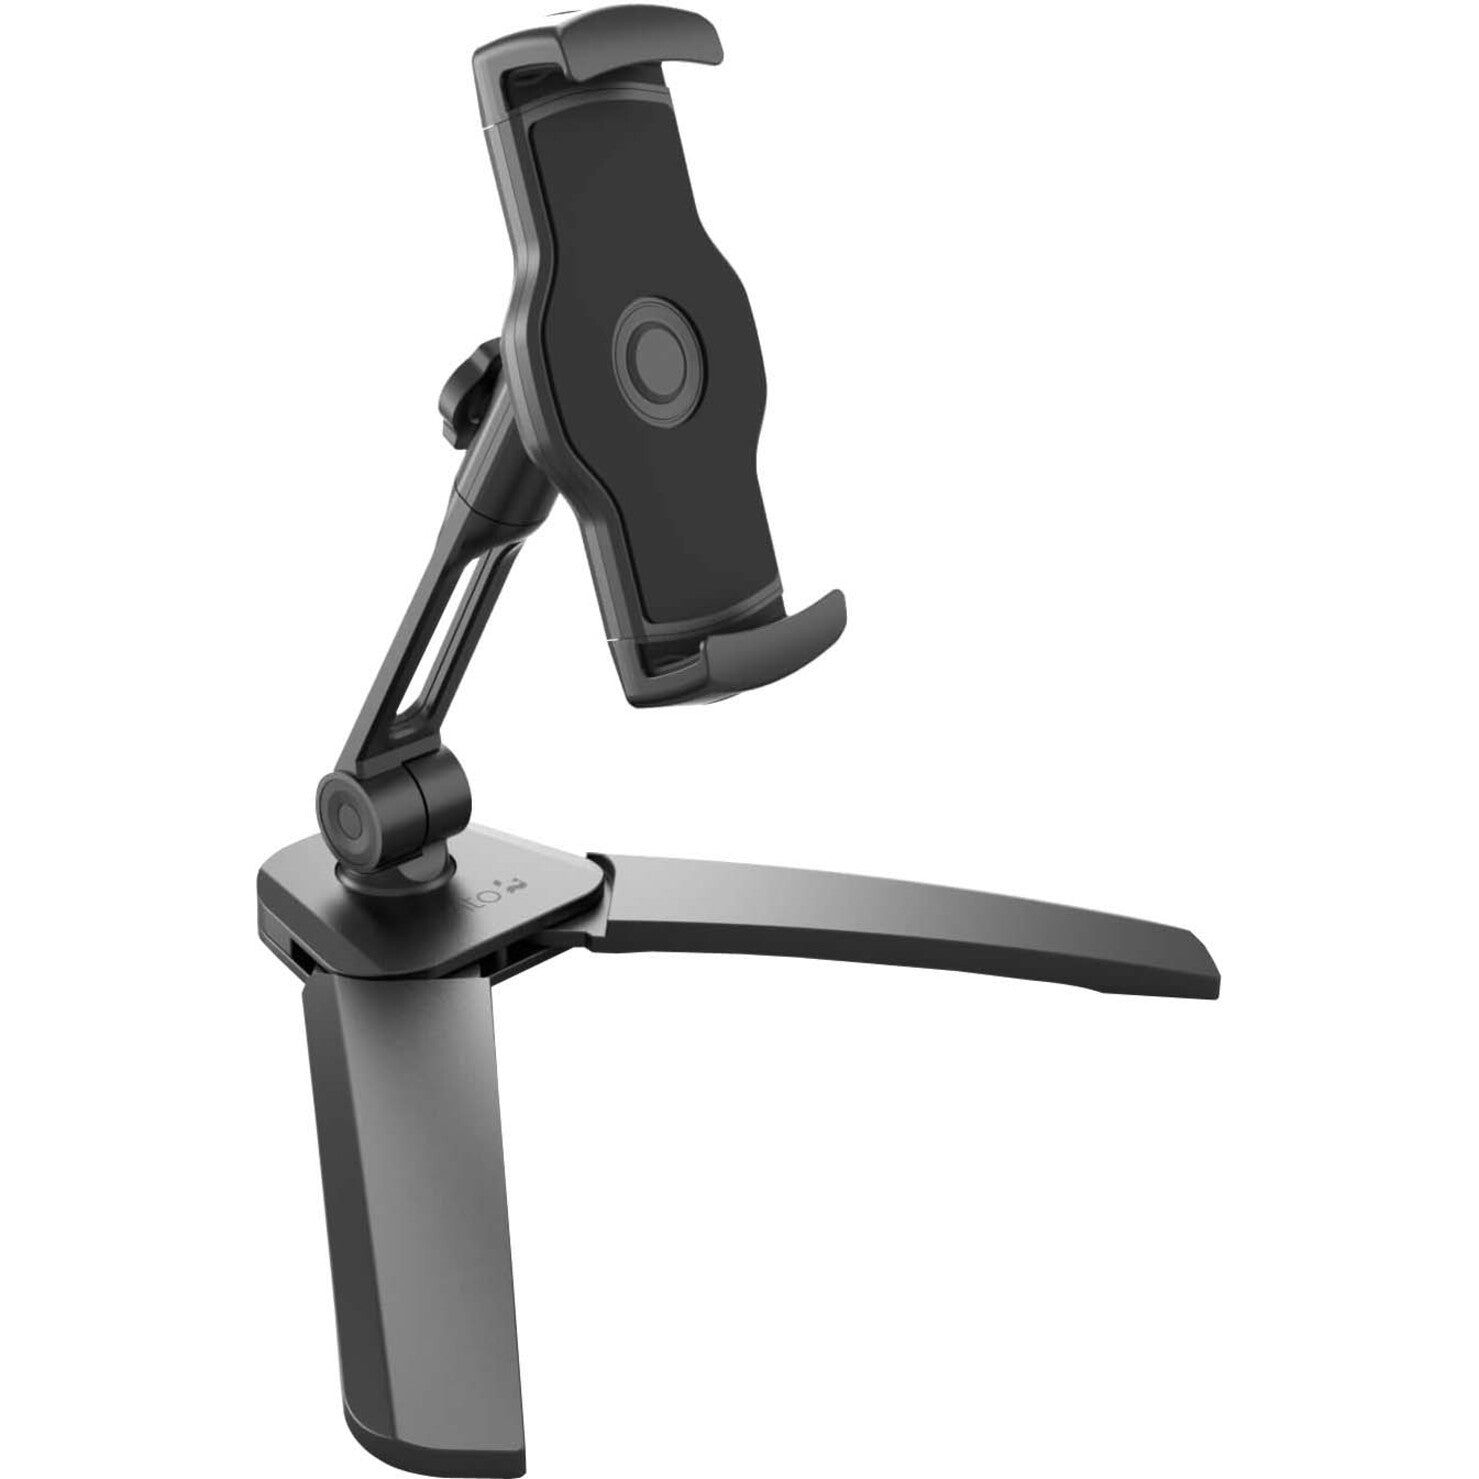 Kanto Phone & Tablet Stand - Portable, Lightweight, Durable, 360° Rotation [Discontinued]